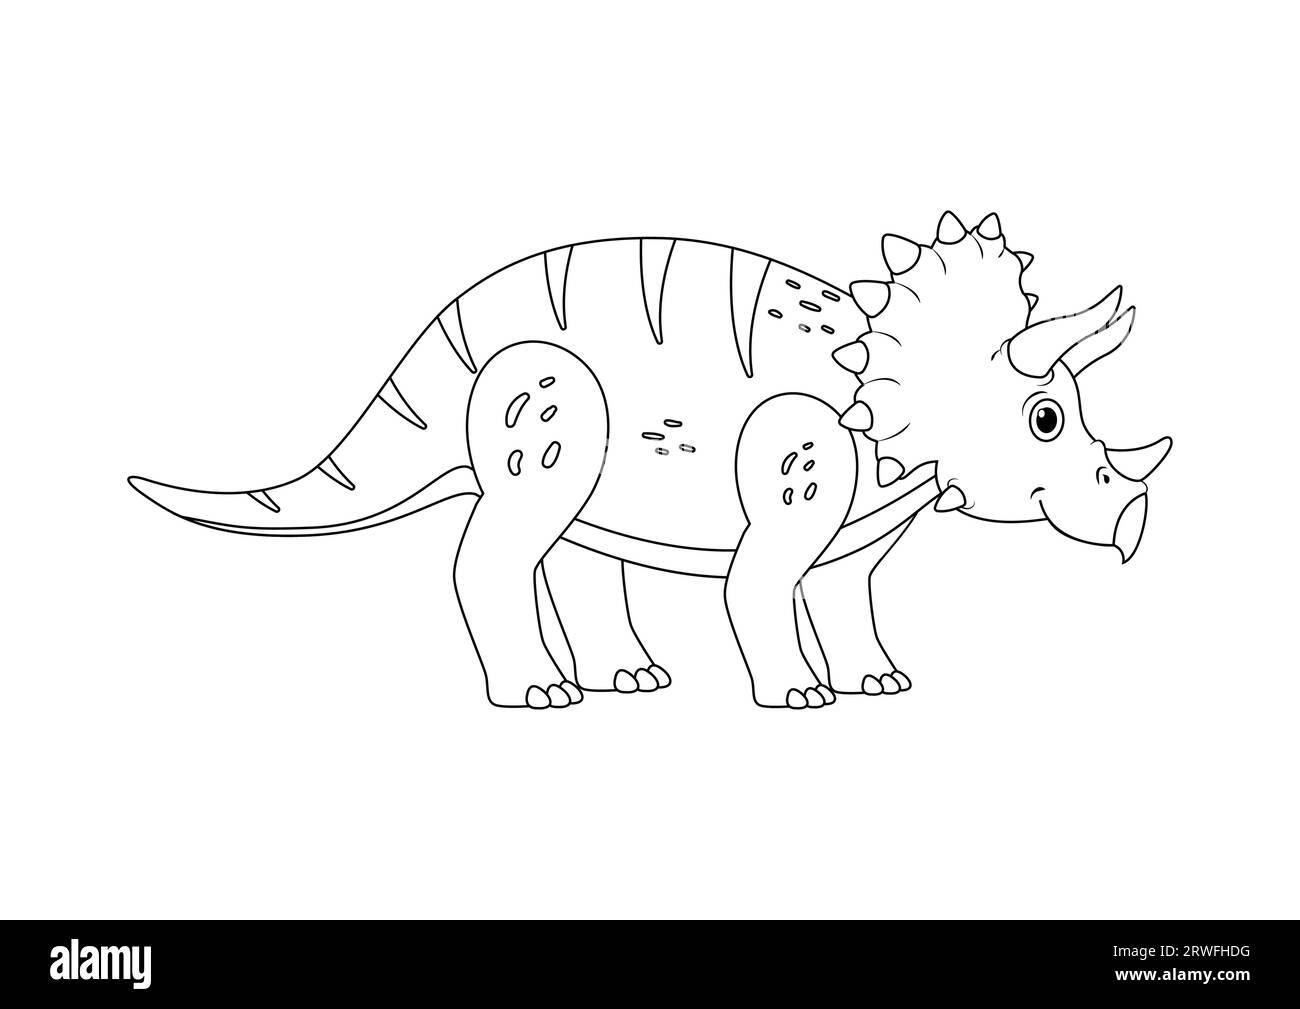 Black and White Triceratops Dinosaur Cartoon Character Vector. Coloring Page of a Triceratops Dinosaur Stock Vector